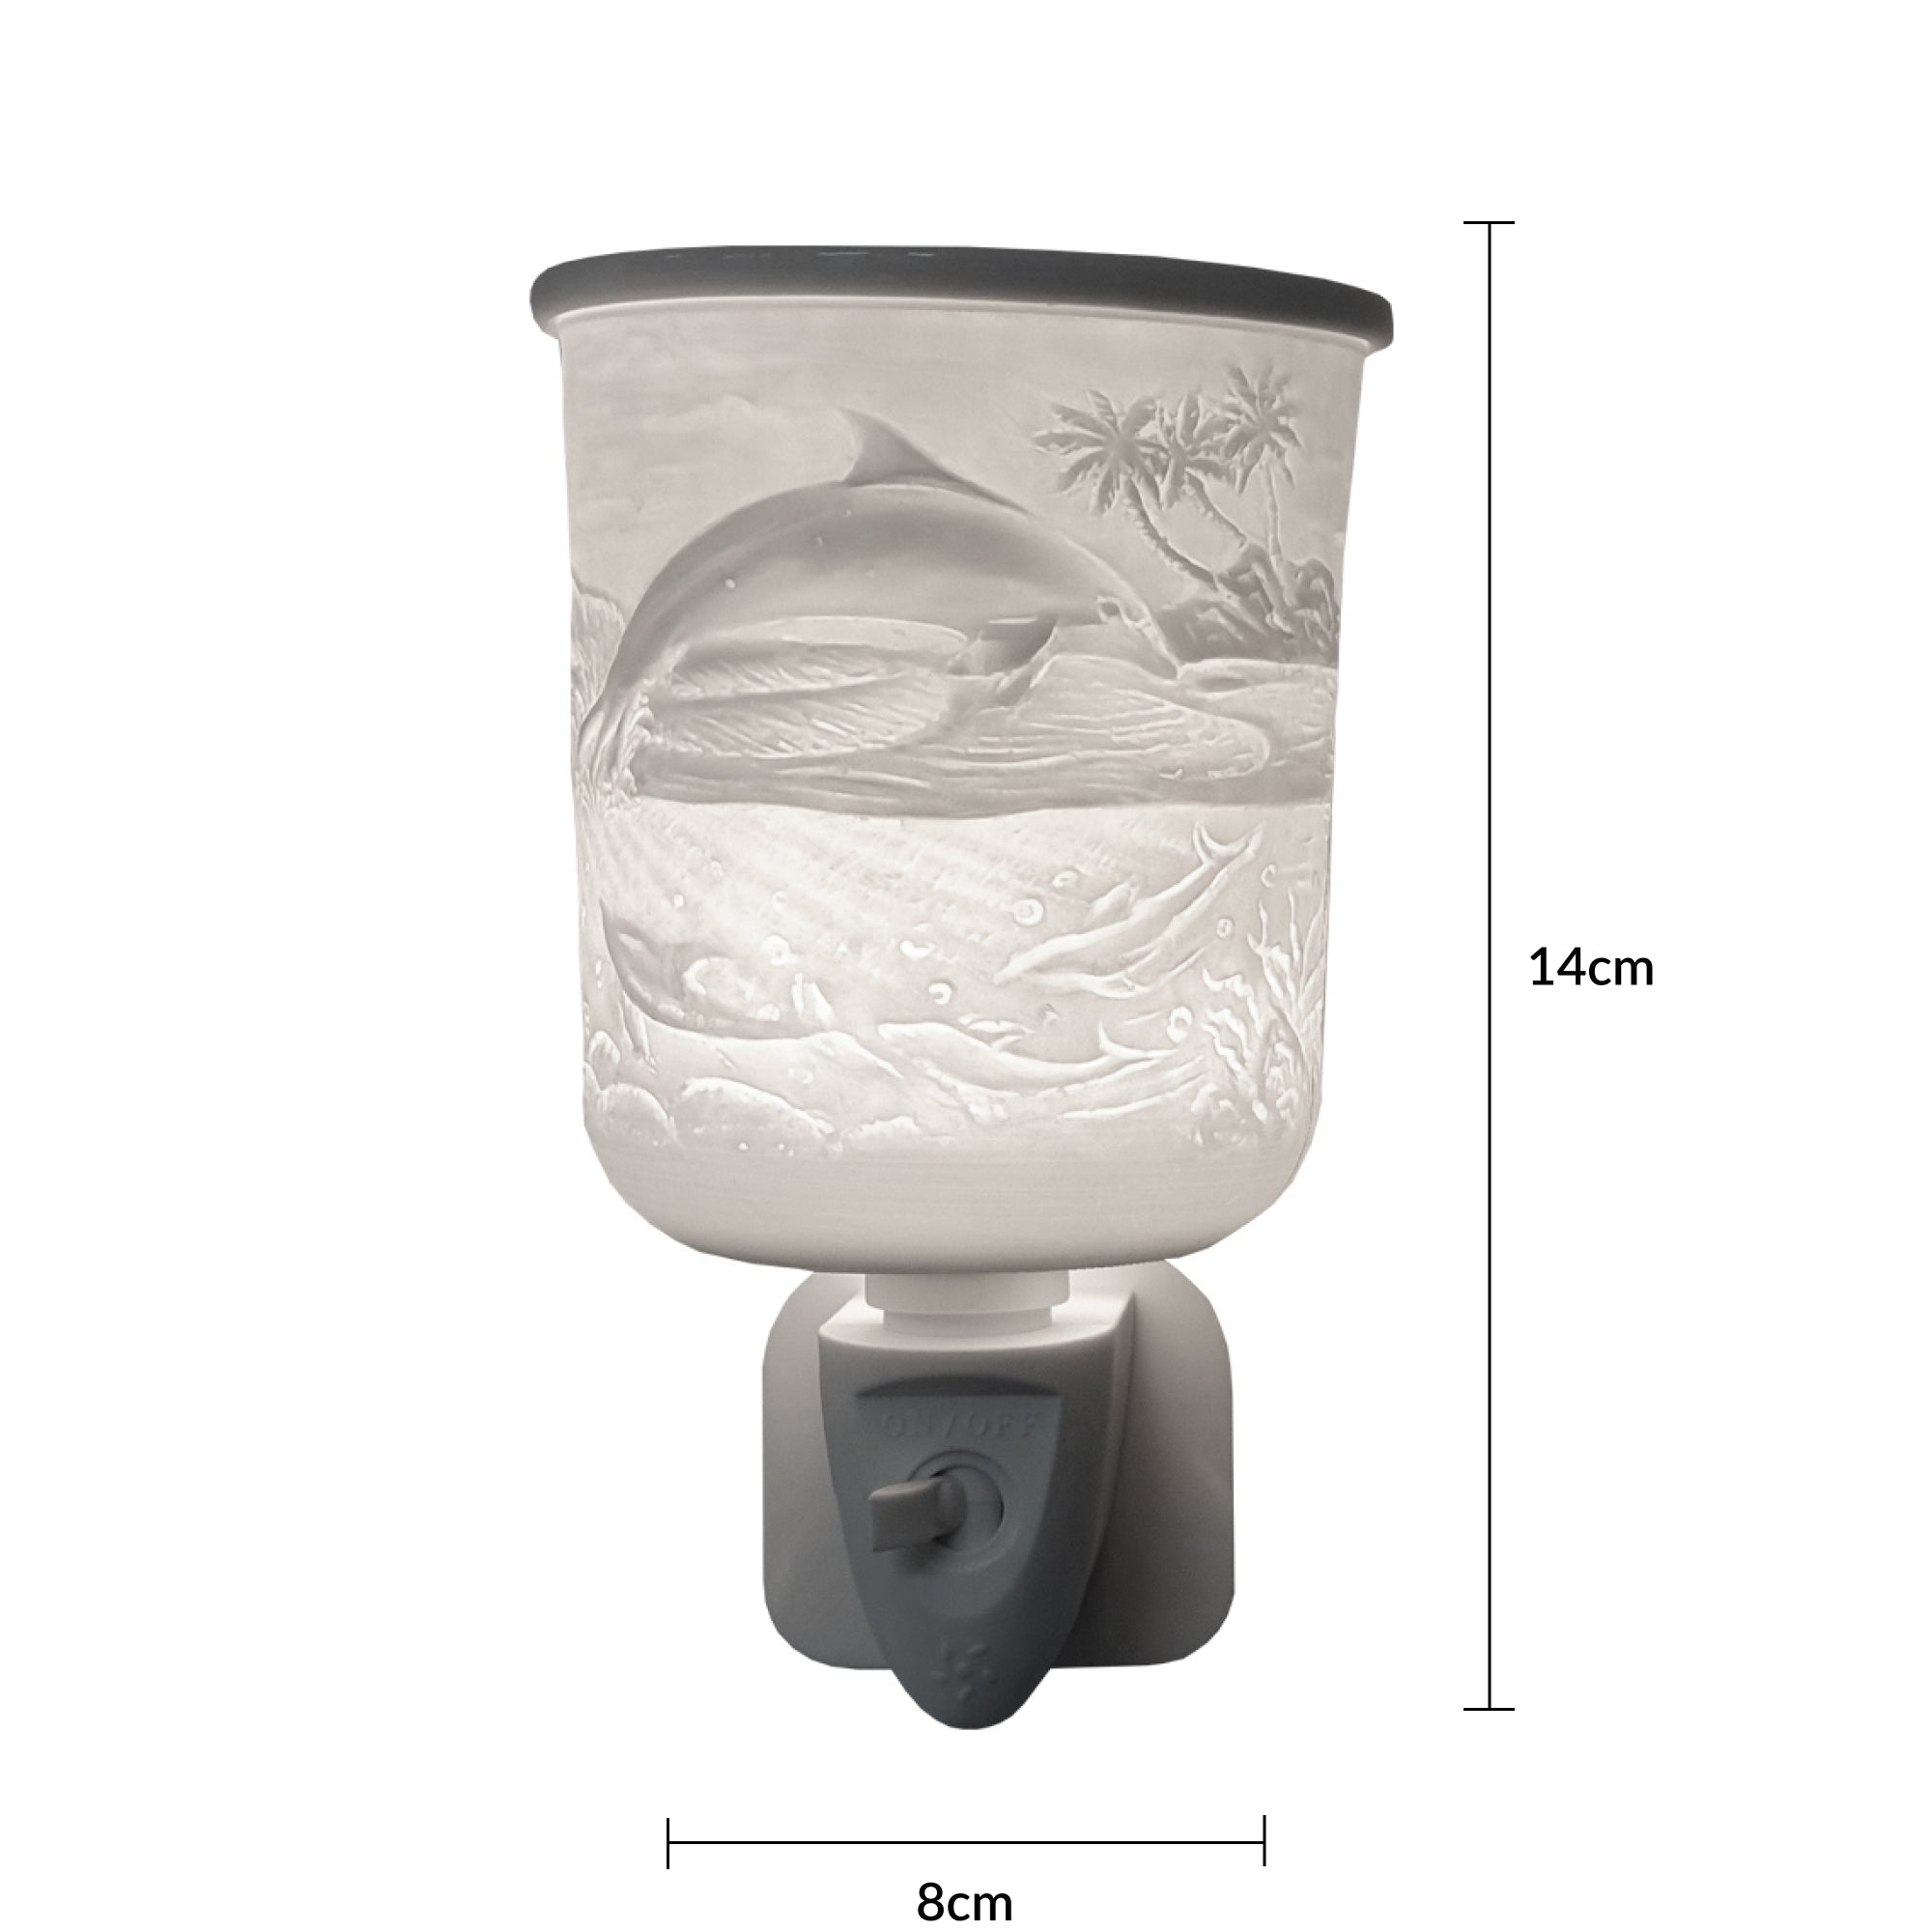 Cello - Porcelain Plug In Electric Warmer - Dolphin